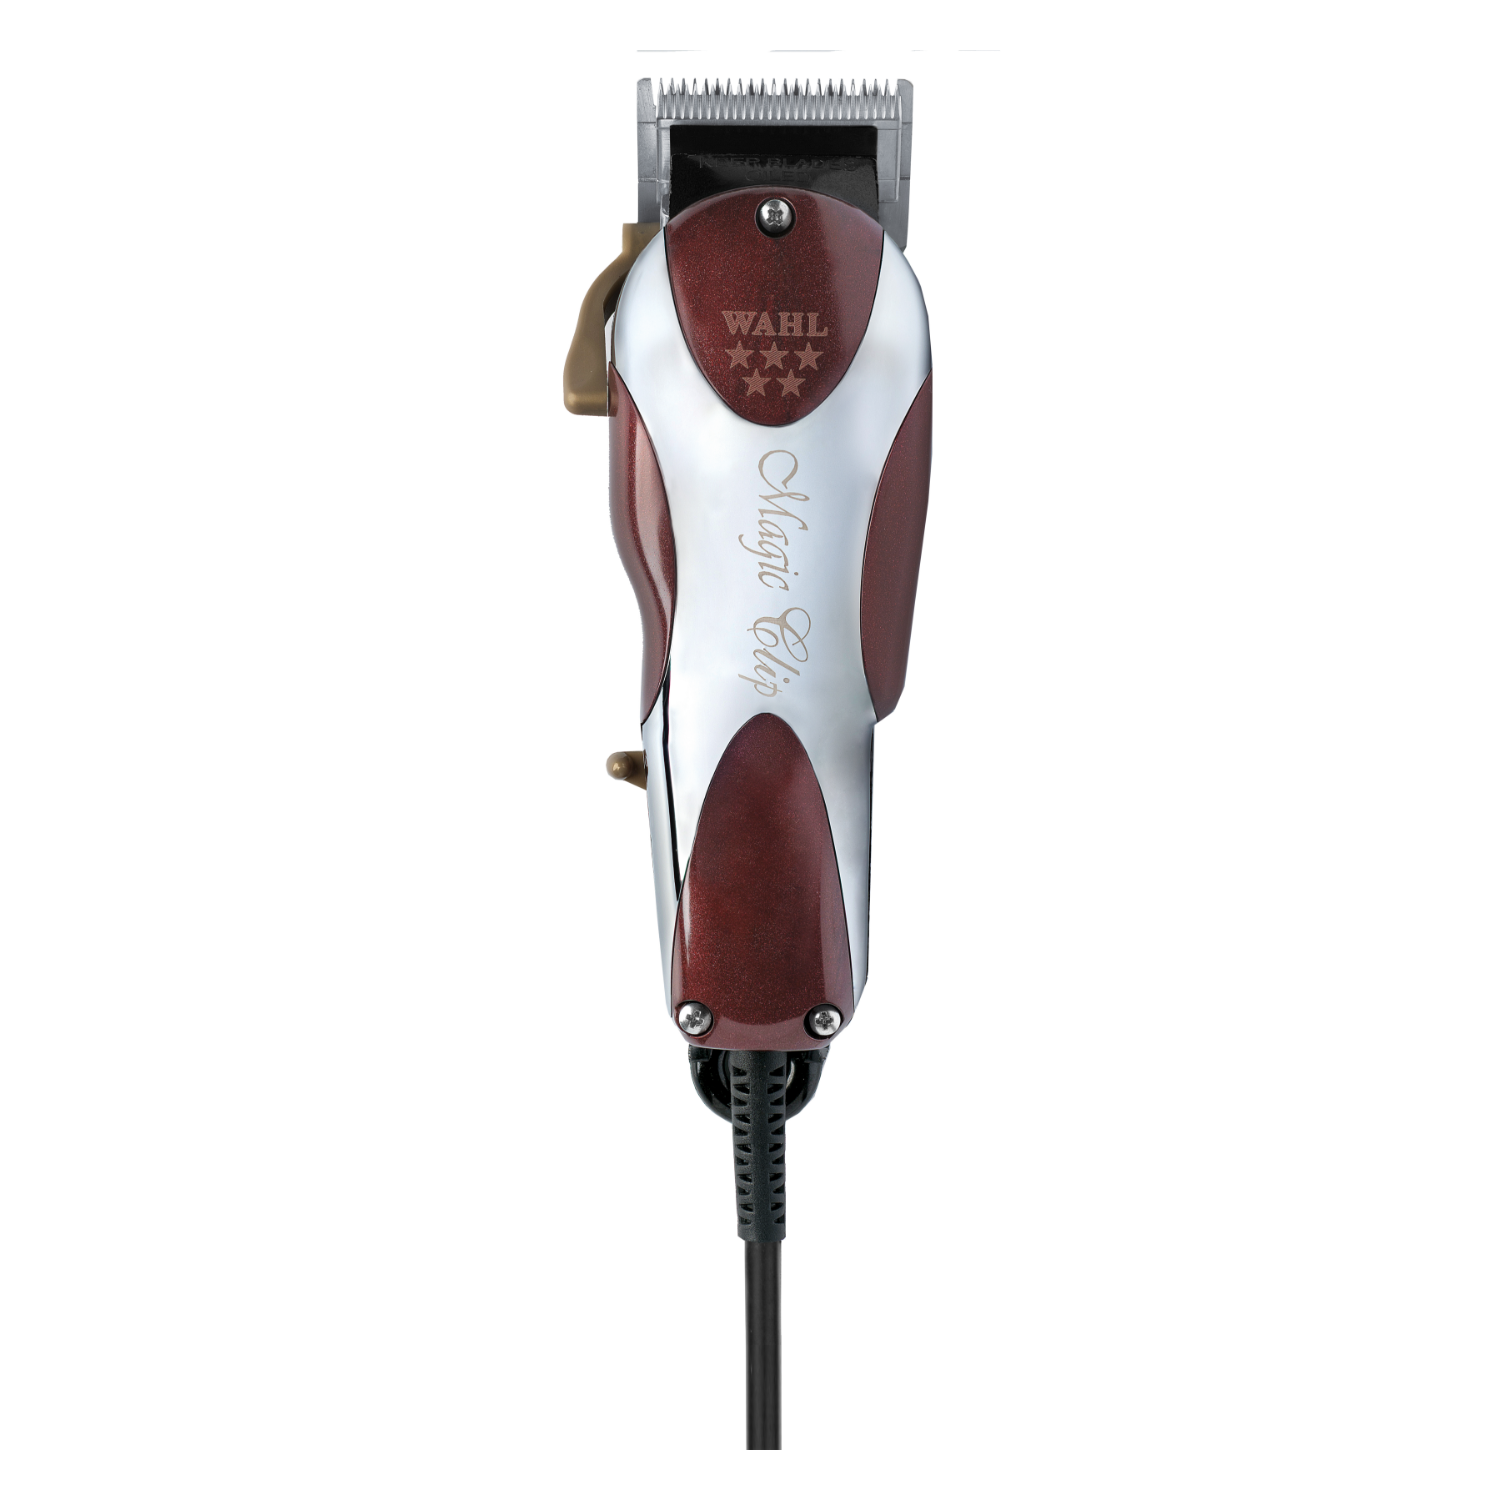 Wahl 56166 Professional 5 Star Precision Fade Clipper and Trimmer